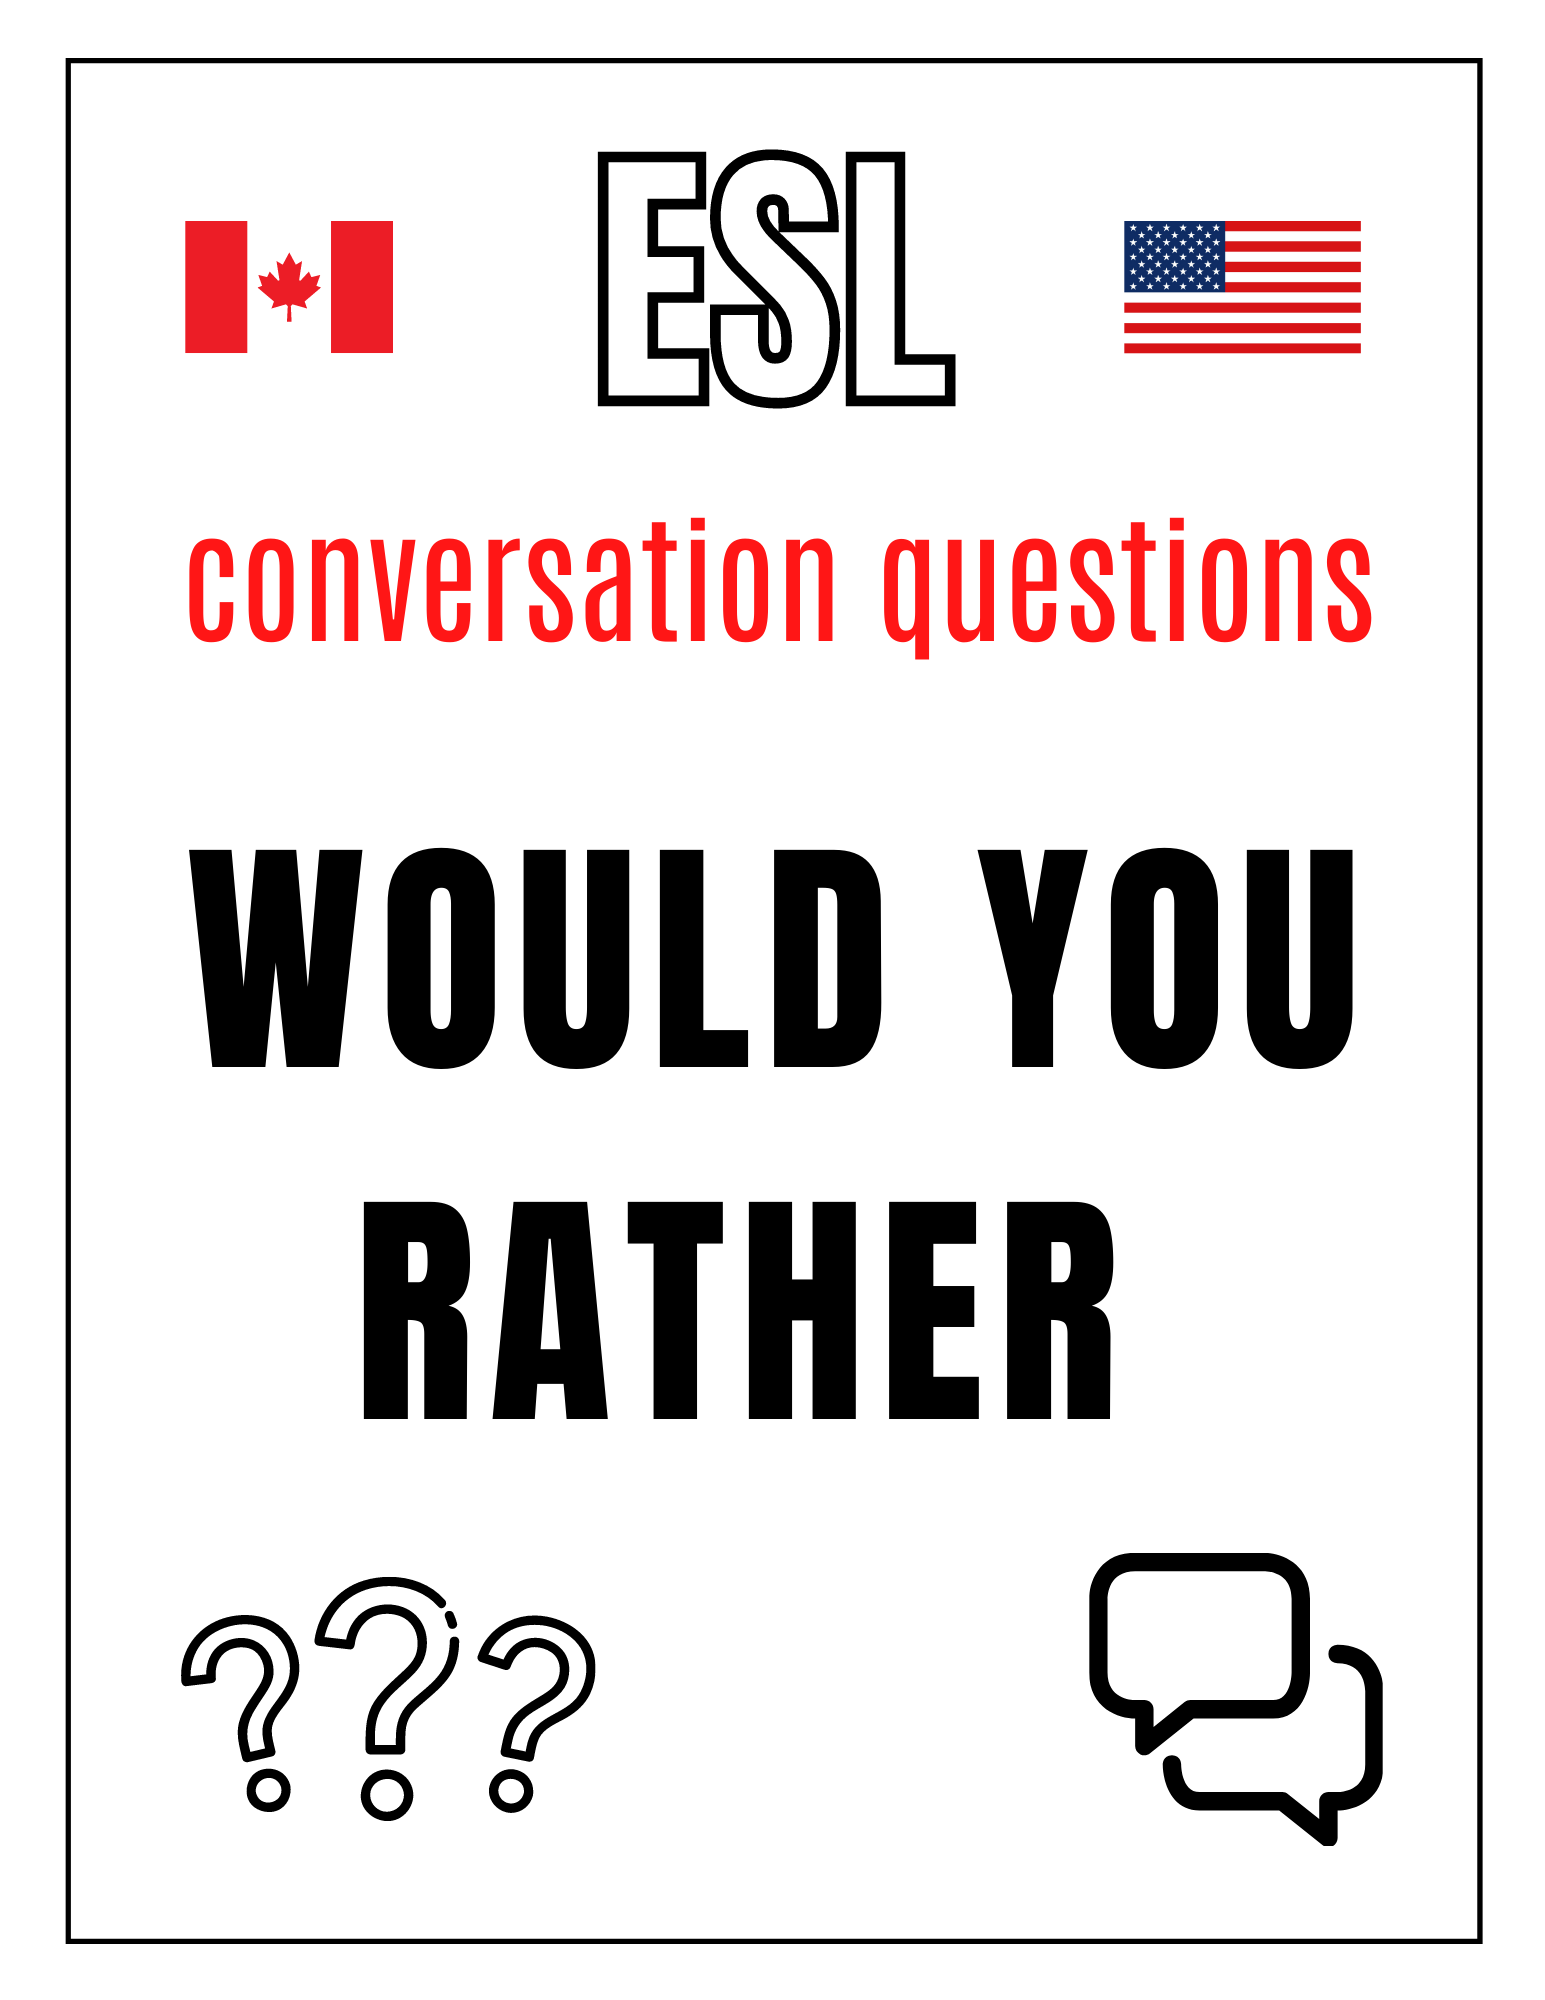 Using Would You Rather Questions with English Language Learners